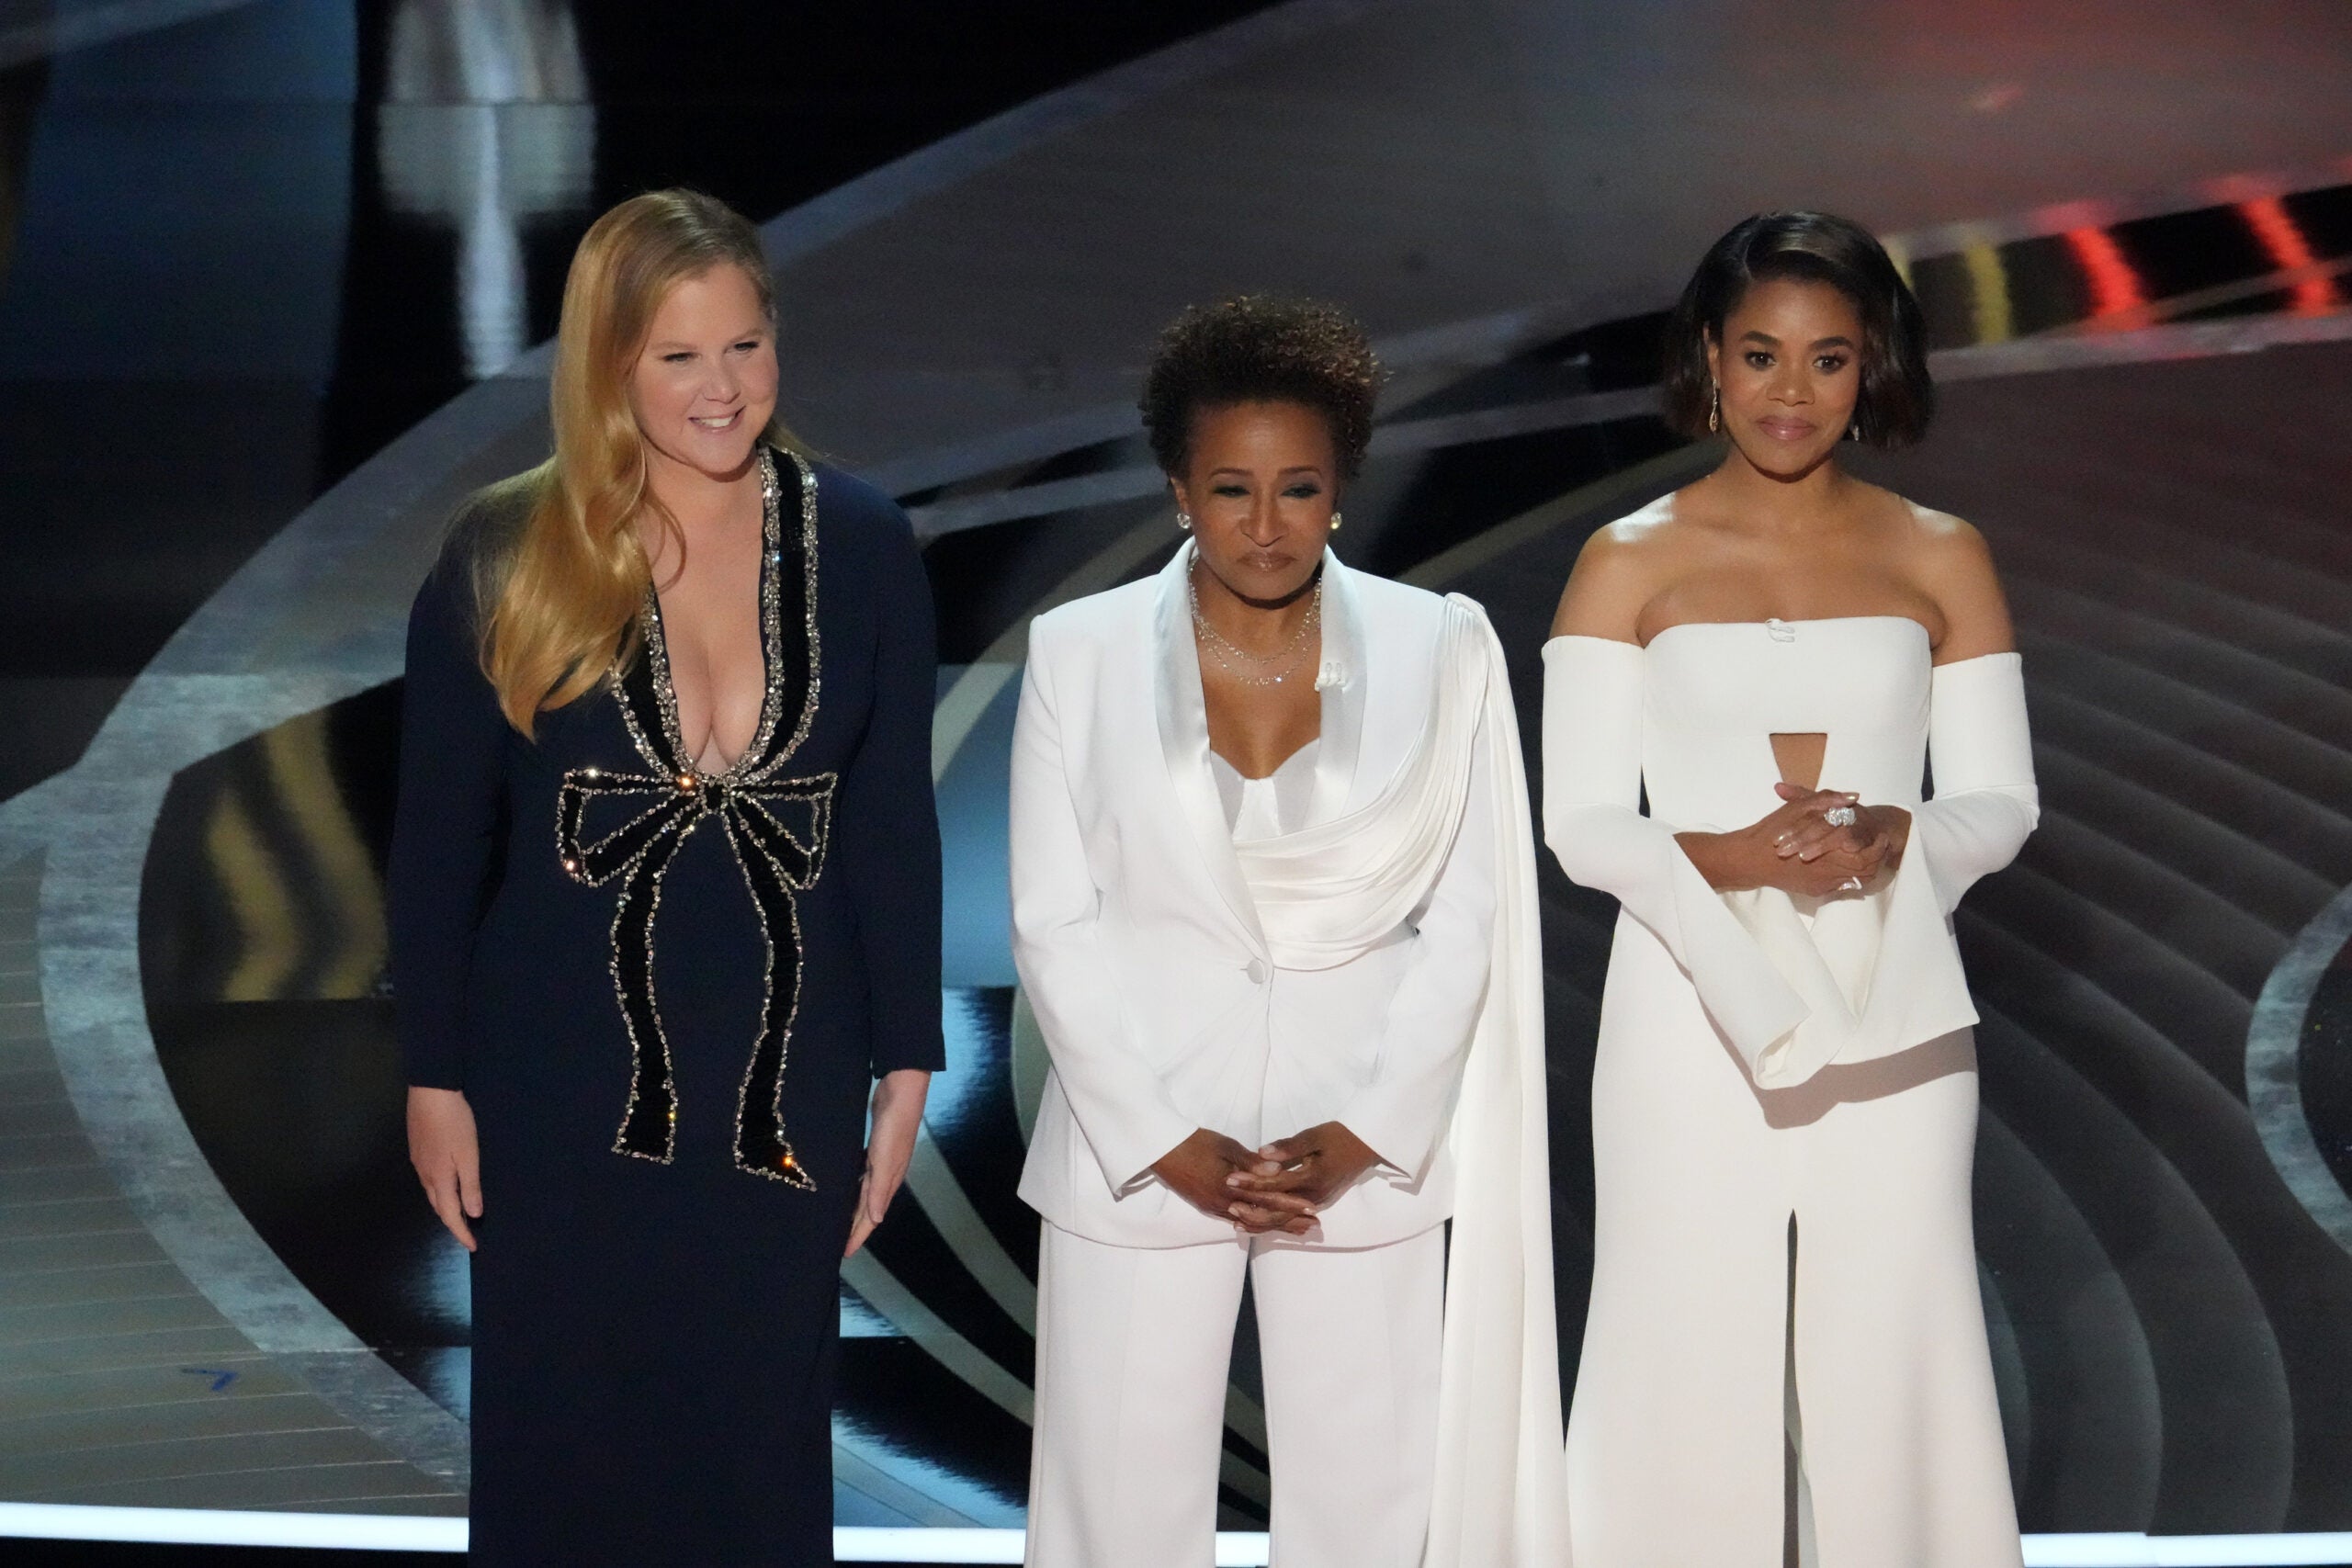 Hosts Amy Schumer, from left, Wanda Sykes, and Regina Hall appear on stage during the 94th Academy Awards at the Dolby Theatre in Los Angeles, on Sunday, March 27, 2022. (Ruth Fremson/The New York Times)